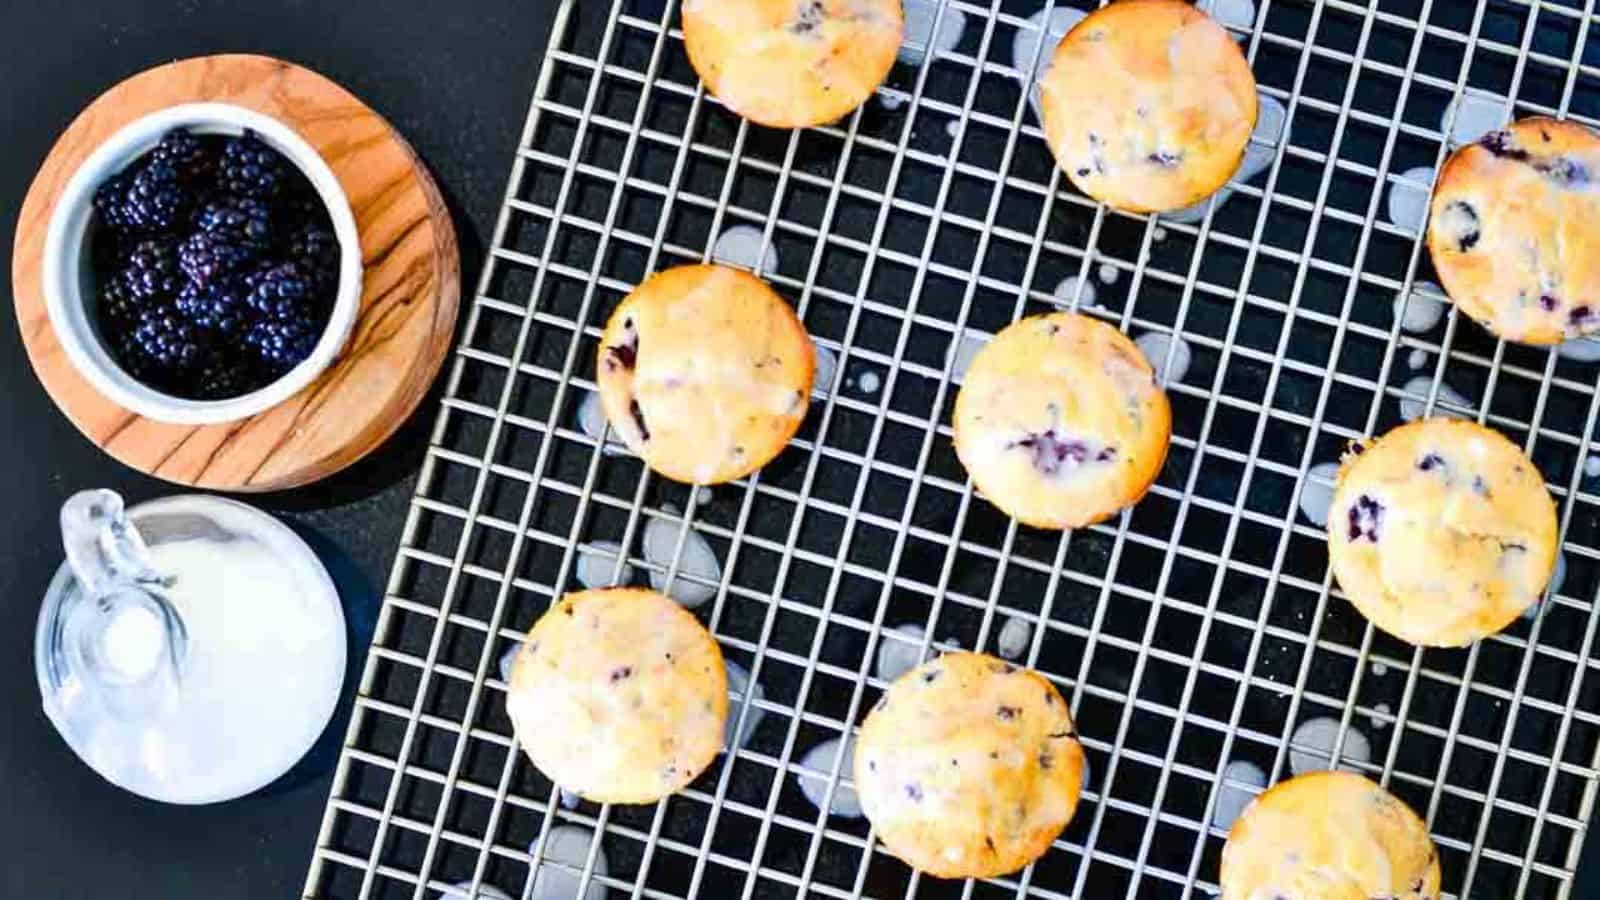 Blackberry muffins drizzled with lemon glaze sitting on a gray cooling rack on a dark background.